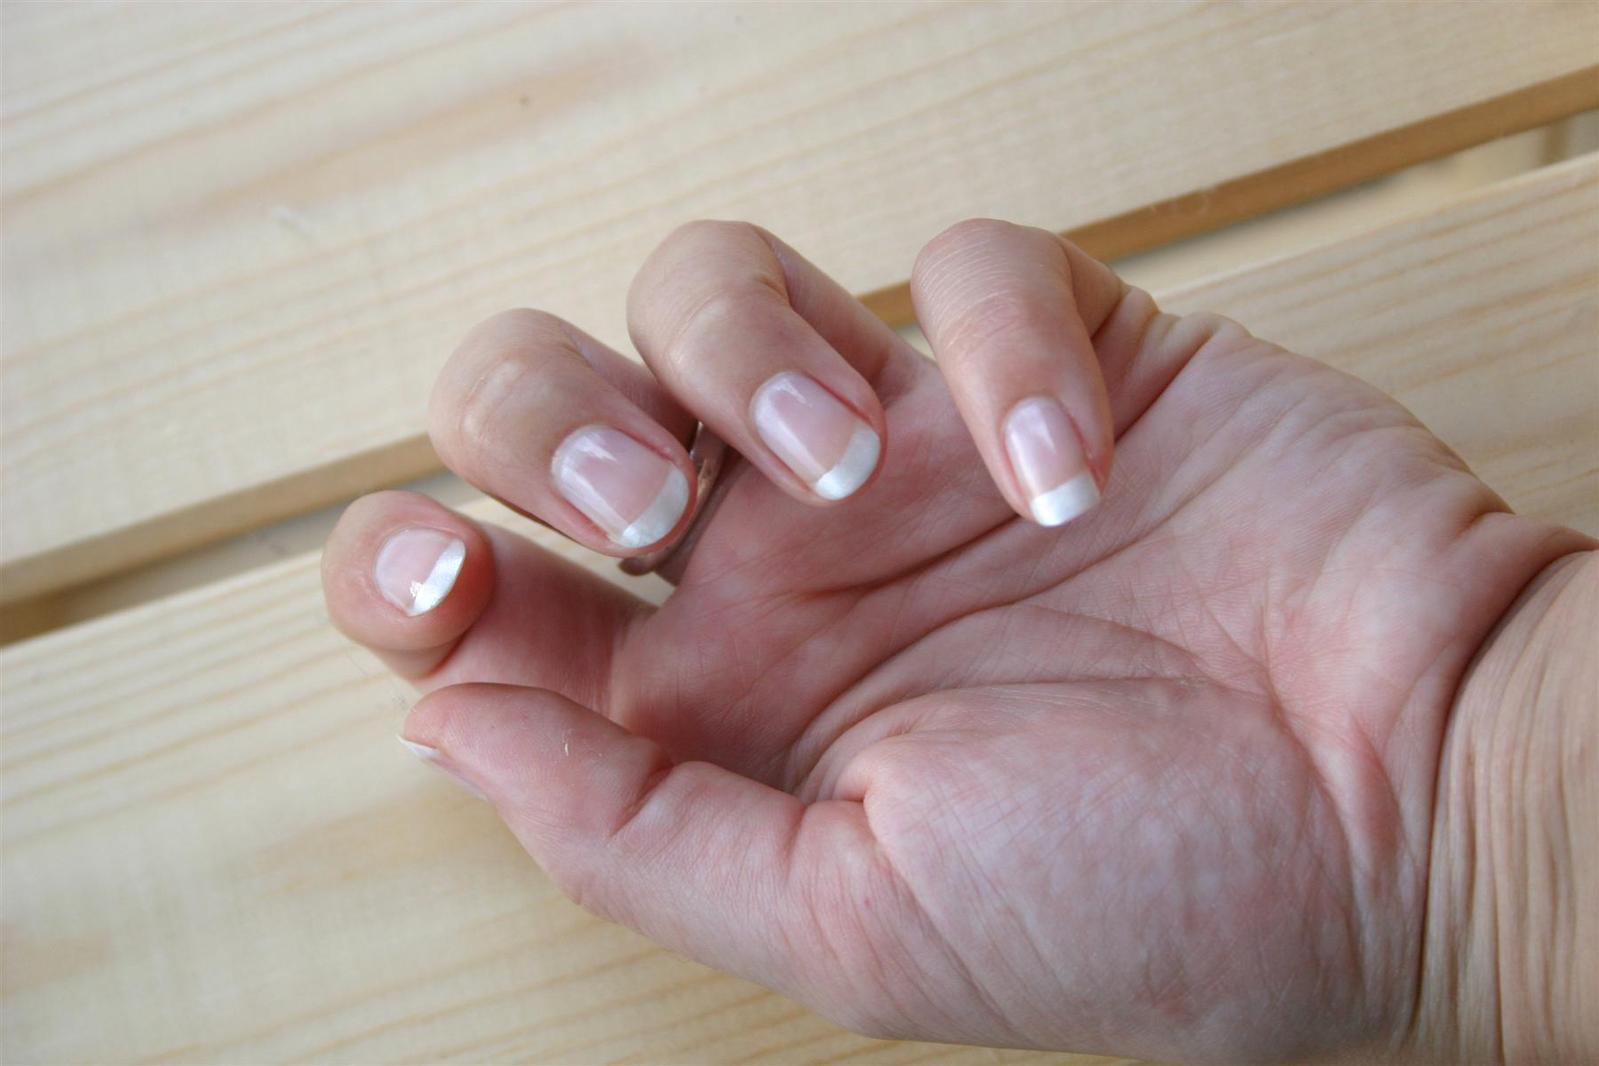 a woman's hands with white nail polish holding her left hand